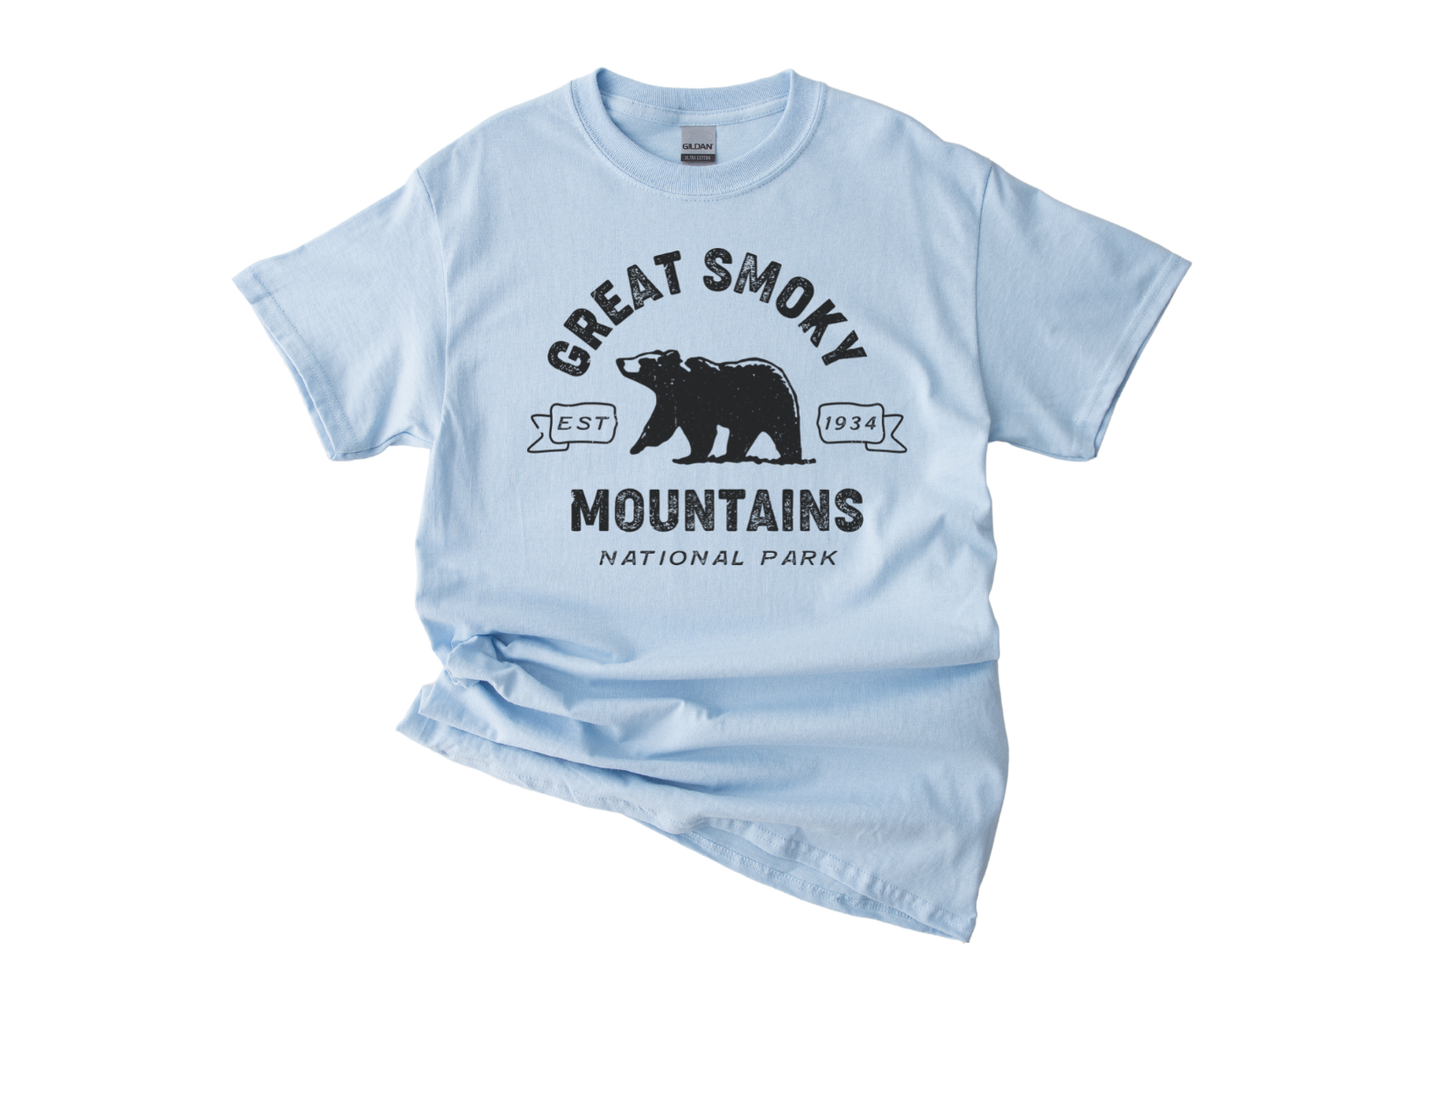 Great Smoky Mountains National Park Unisex T-Shirt